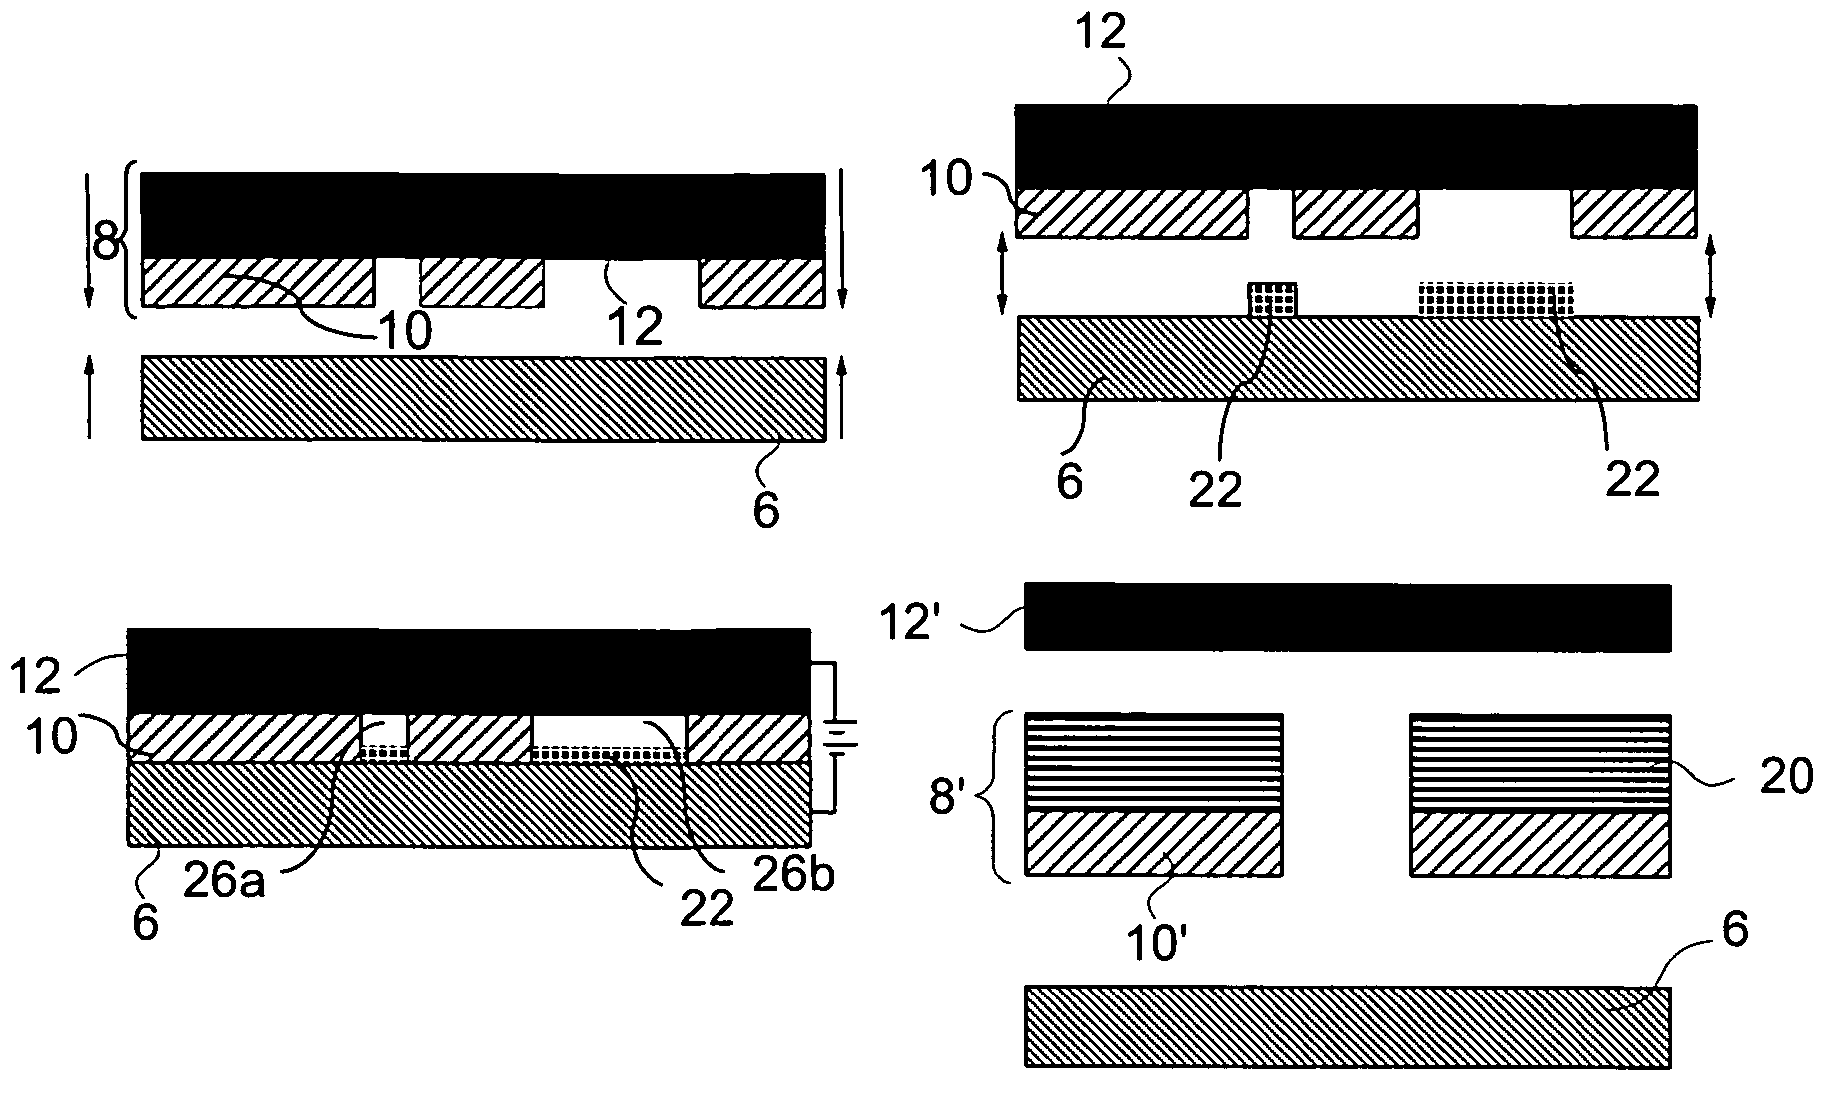 Method for electrochemically forming structures including non-parallel mating of contact masks and substrates